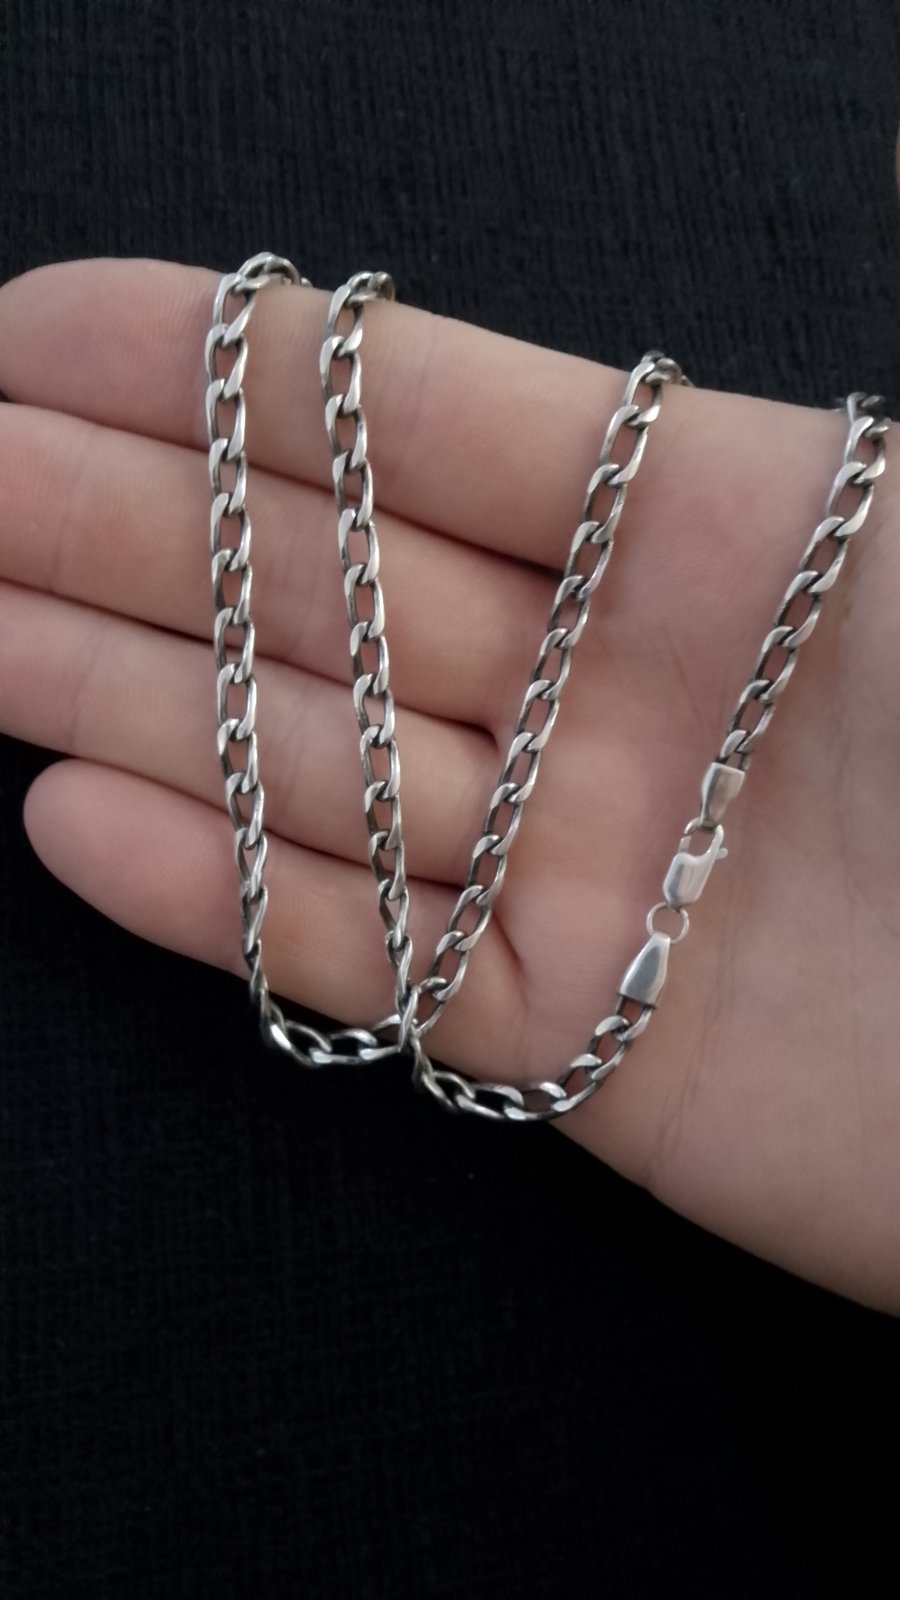 Handcrafted 4.5mm Sterling Silver Curb Chain